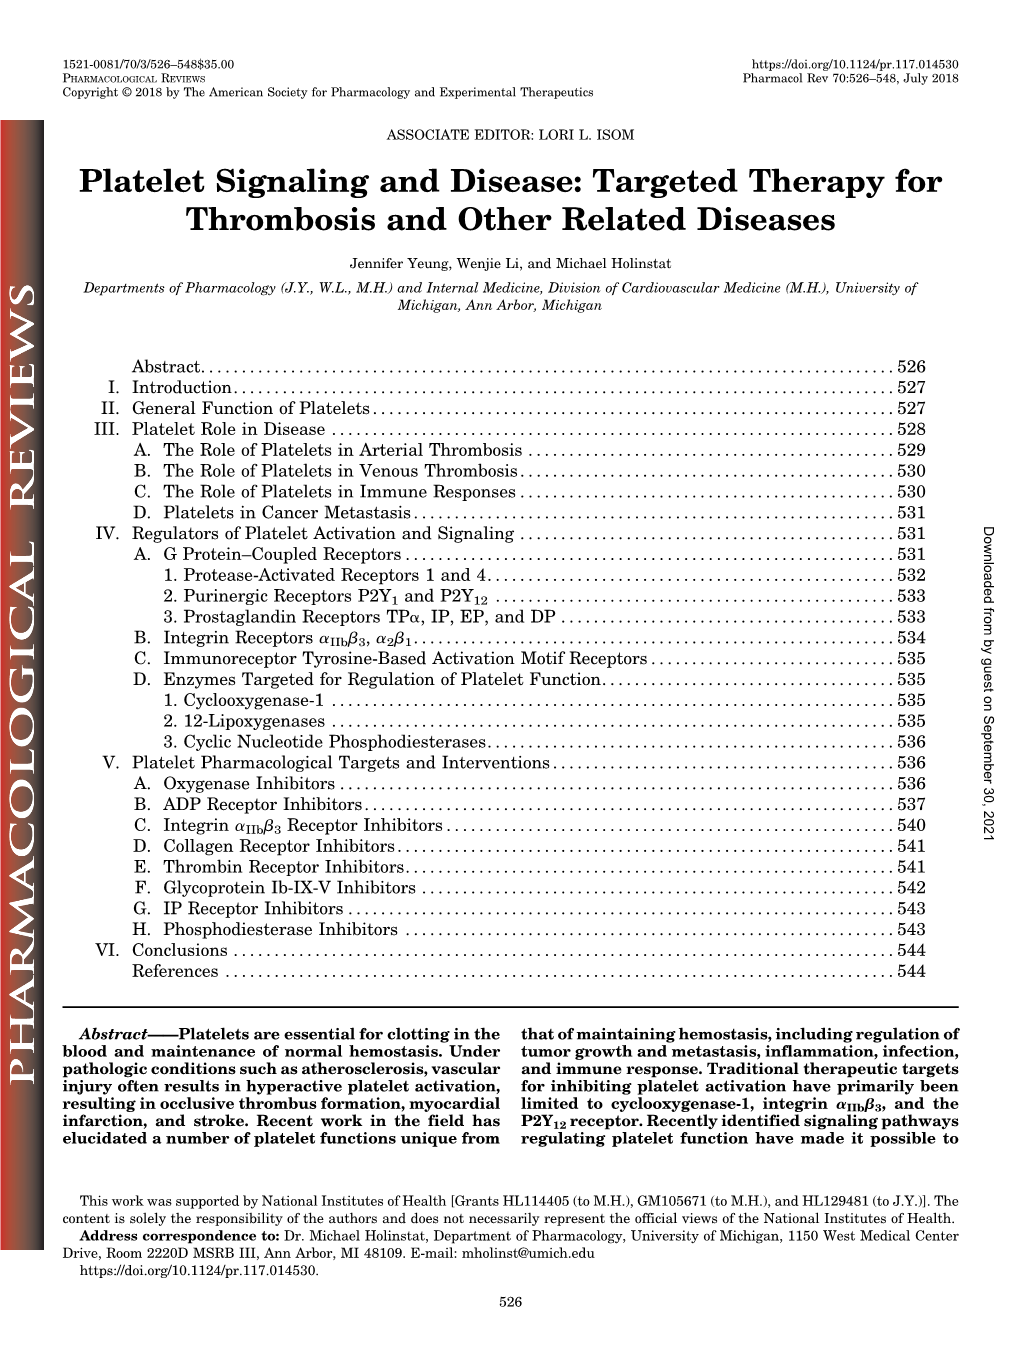 Platelet Signaling and Disease: Targeted Therapy for Thrombosis and Other Related Diseases